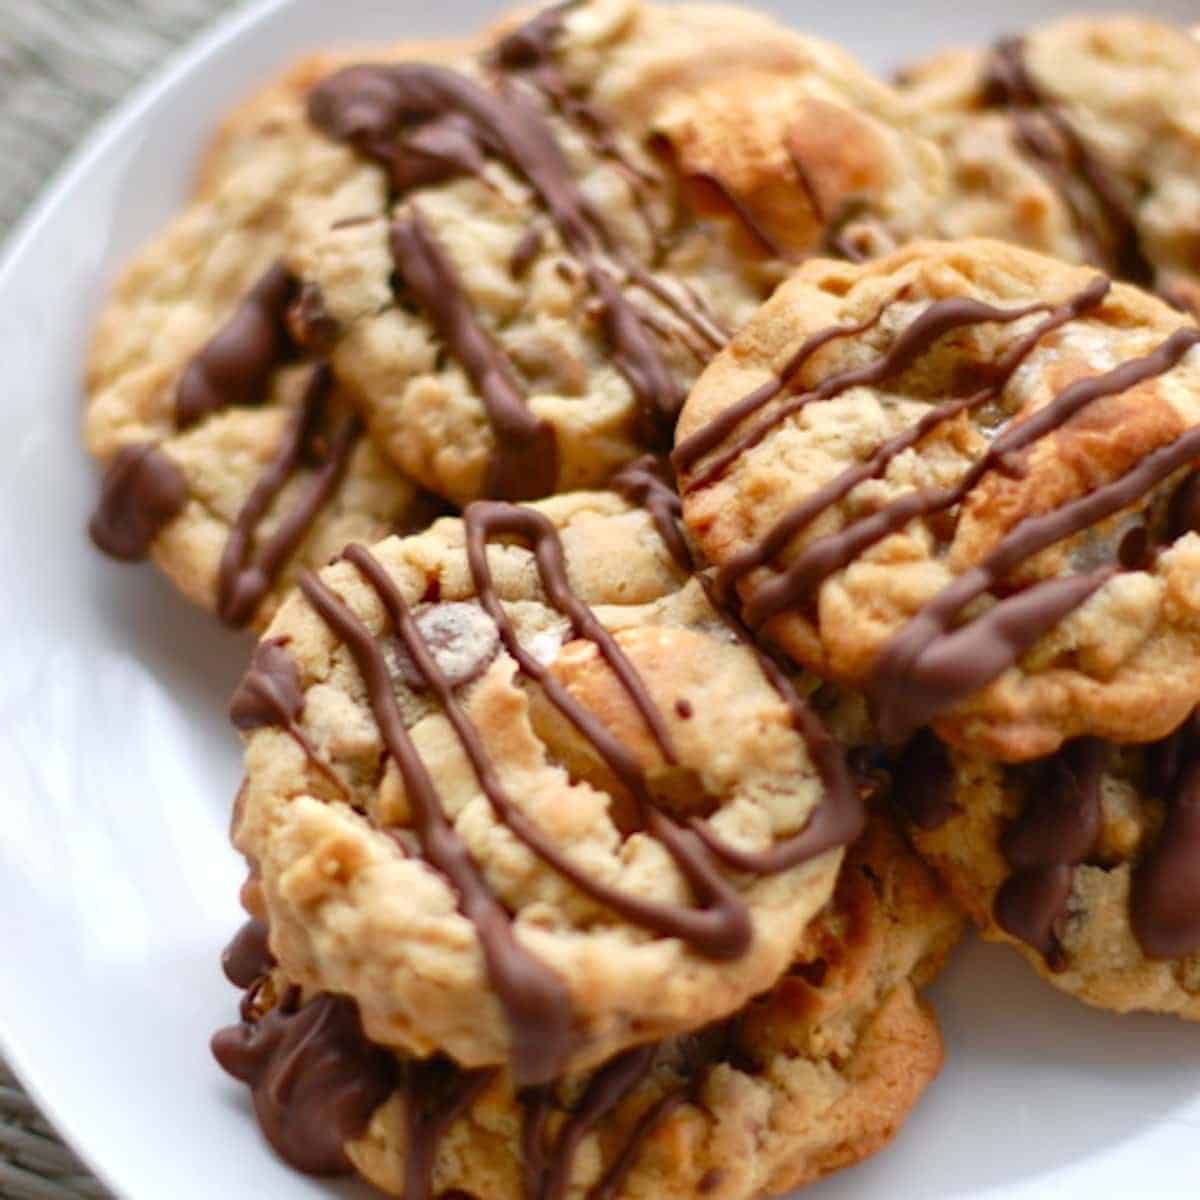 Marshmallow monster cookies with chocolate drizzle.